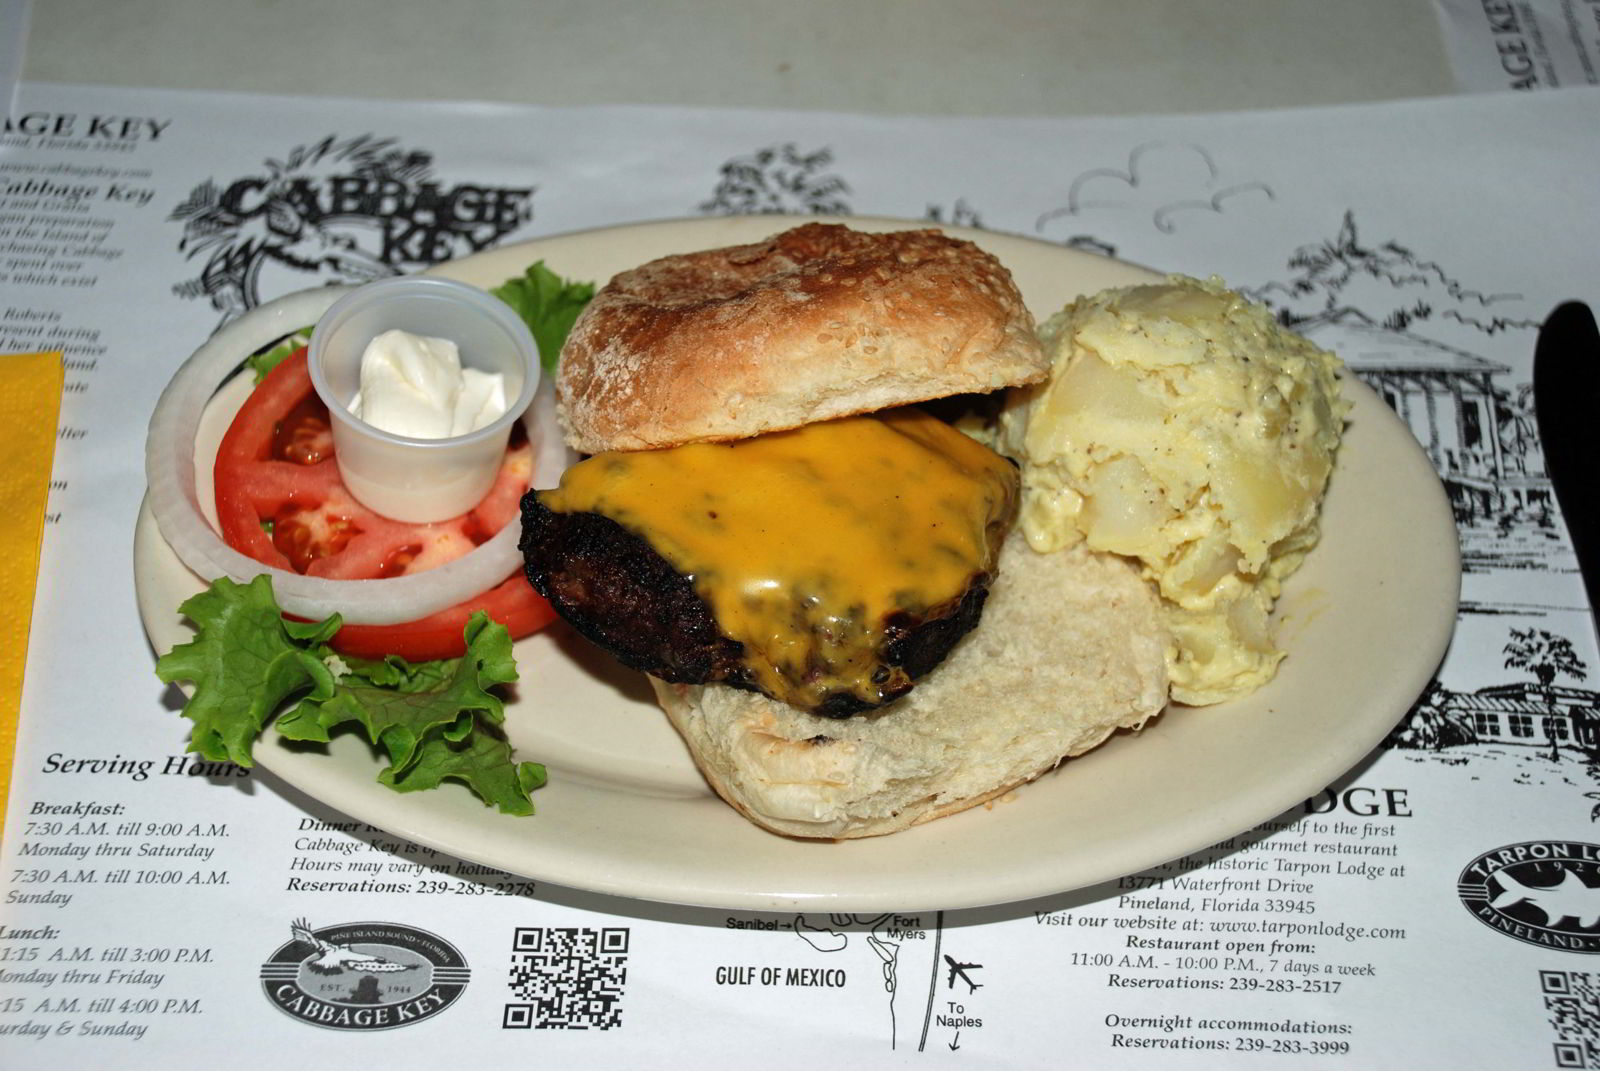 An image of a cheeseburger plate at Cabbage Key Inn and Restaurant - Cannage Key Cheeseburger in Paradise